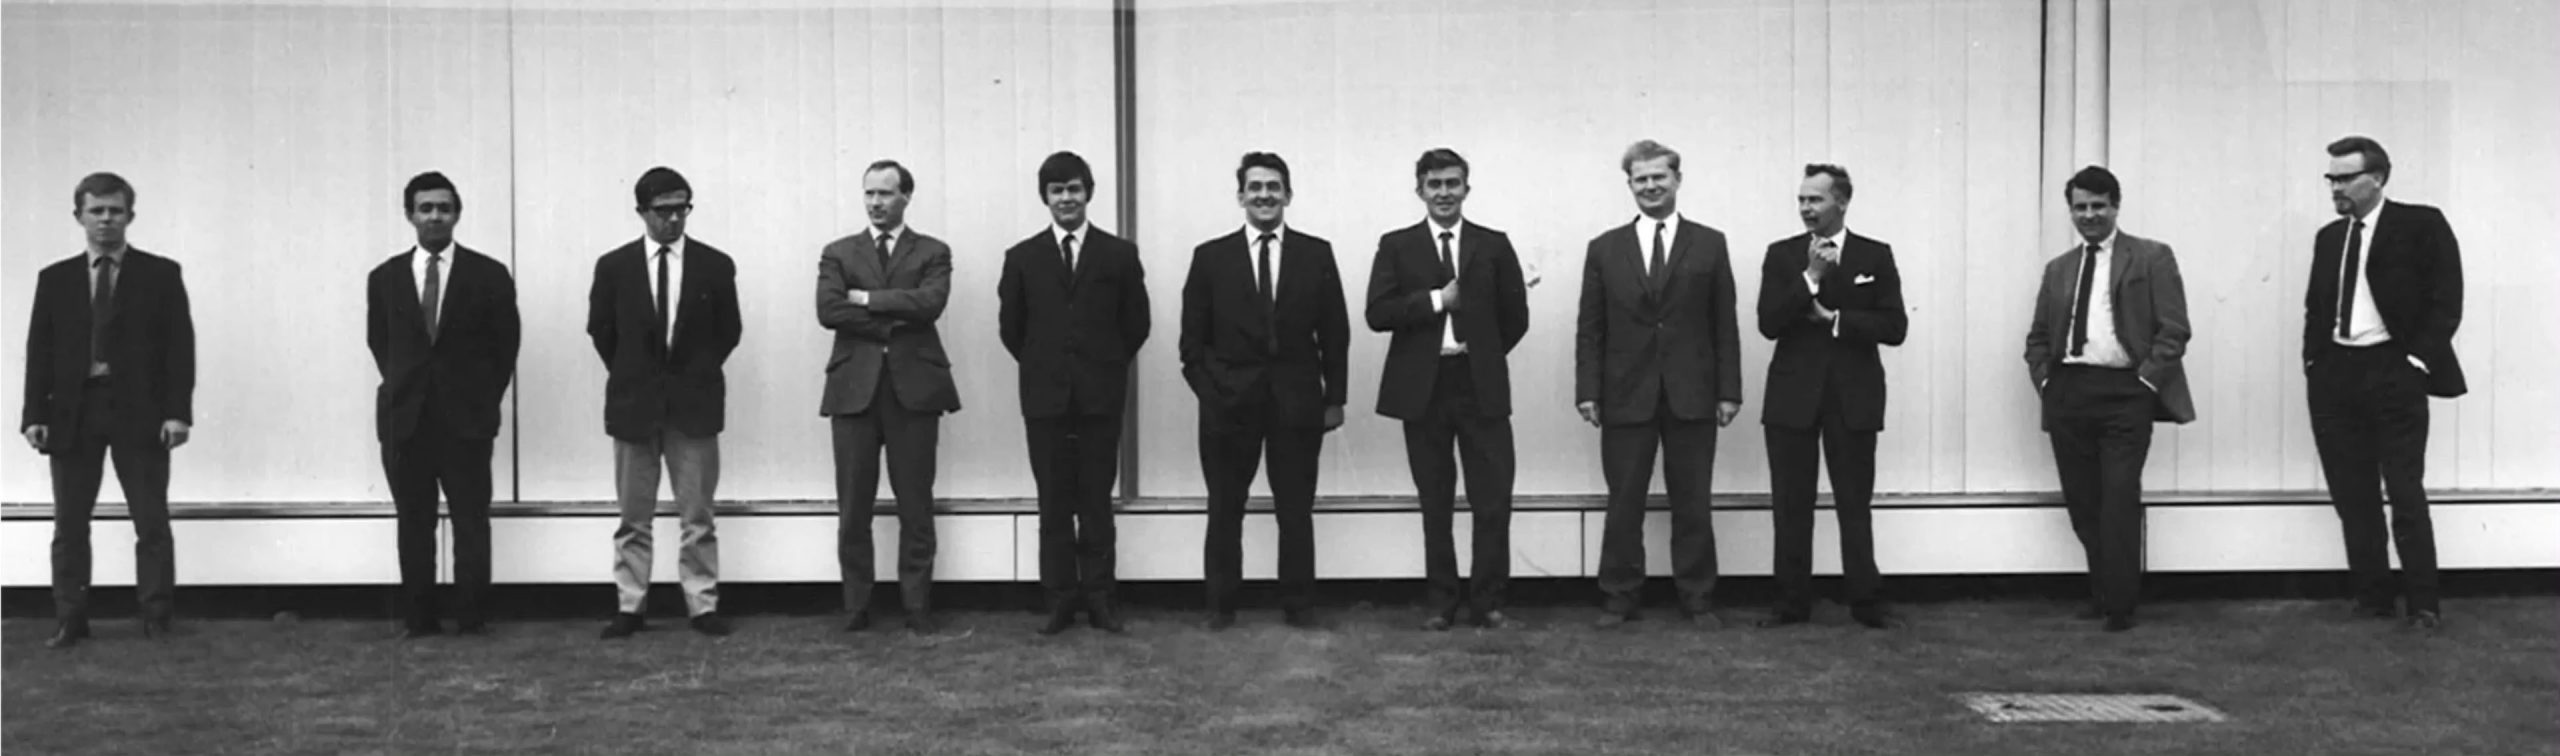 Gordon Ryder and Peter Yates with their team